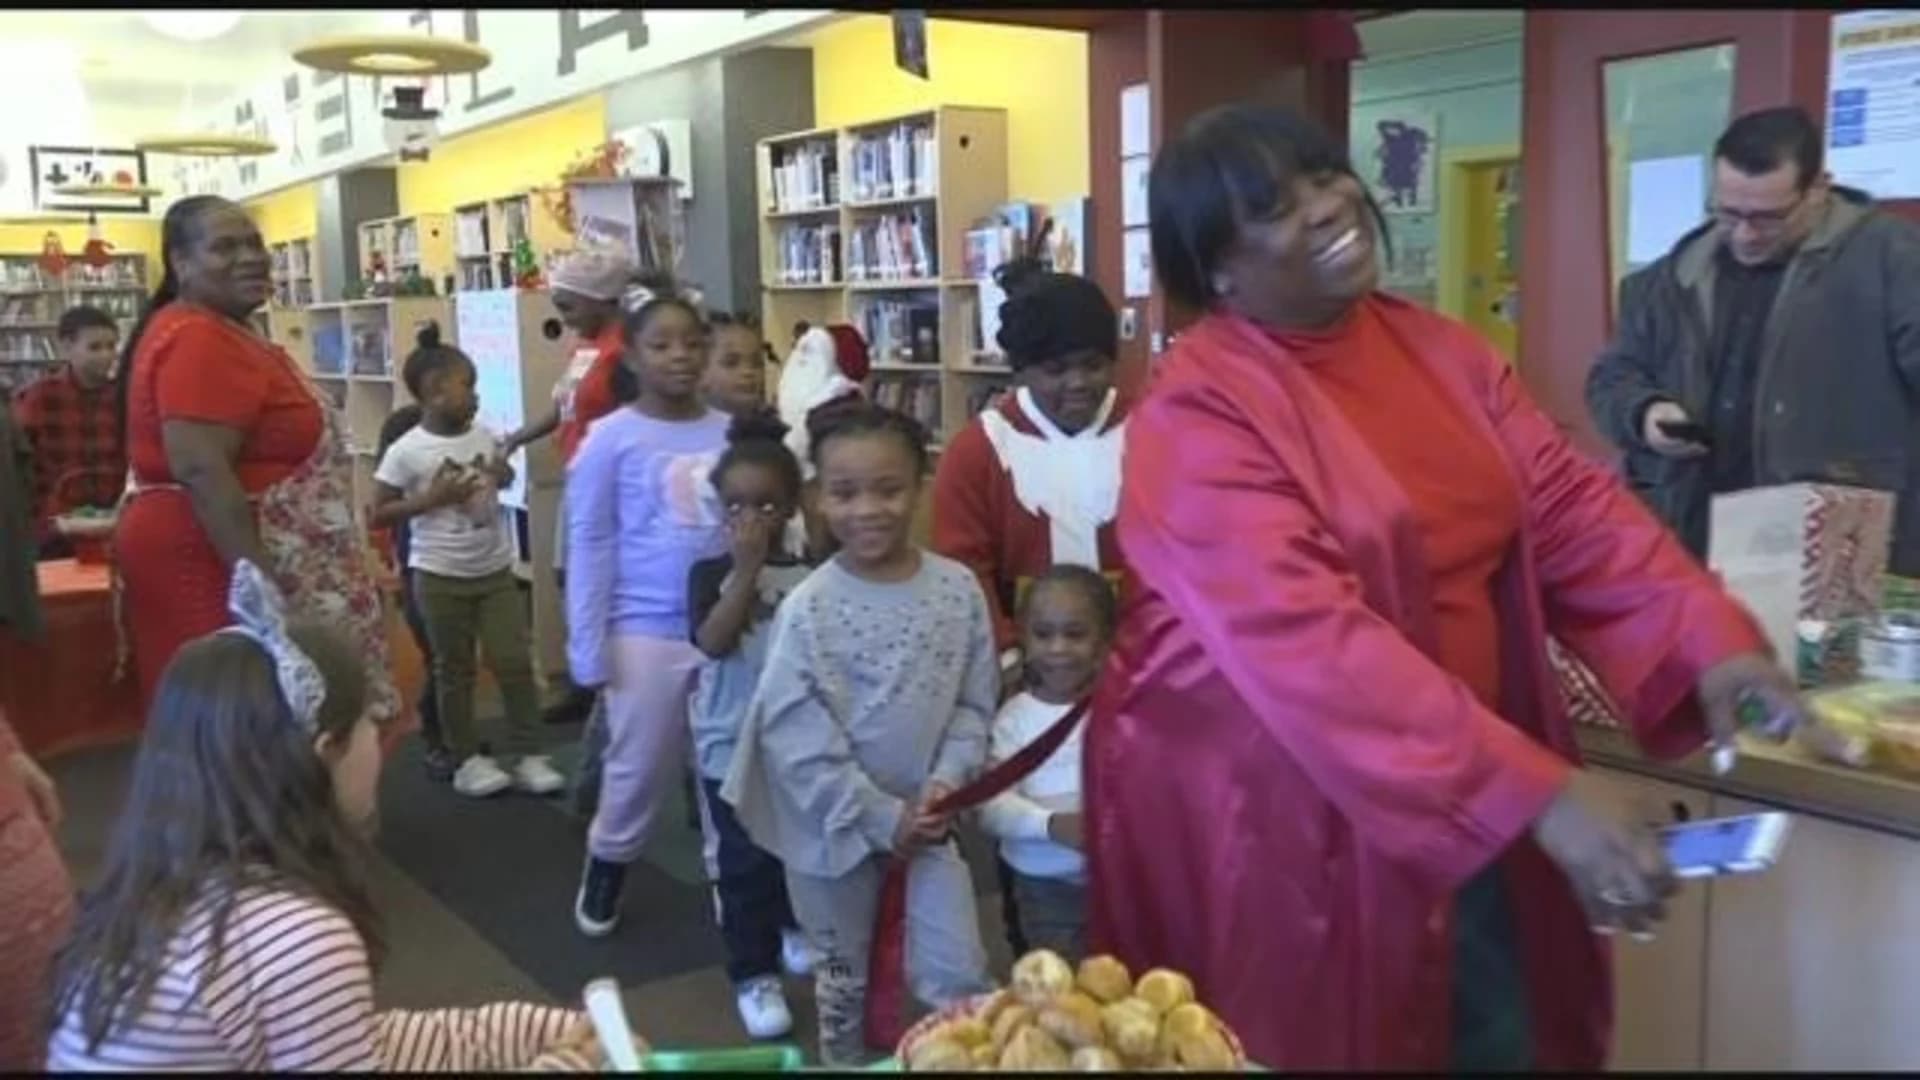 School holds Christmas breakfast for families in Brownsville